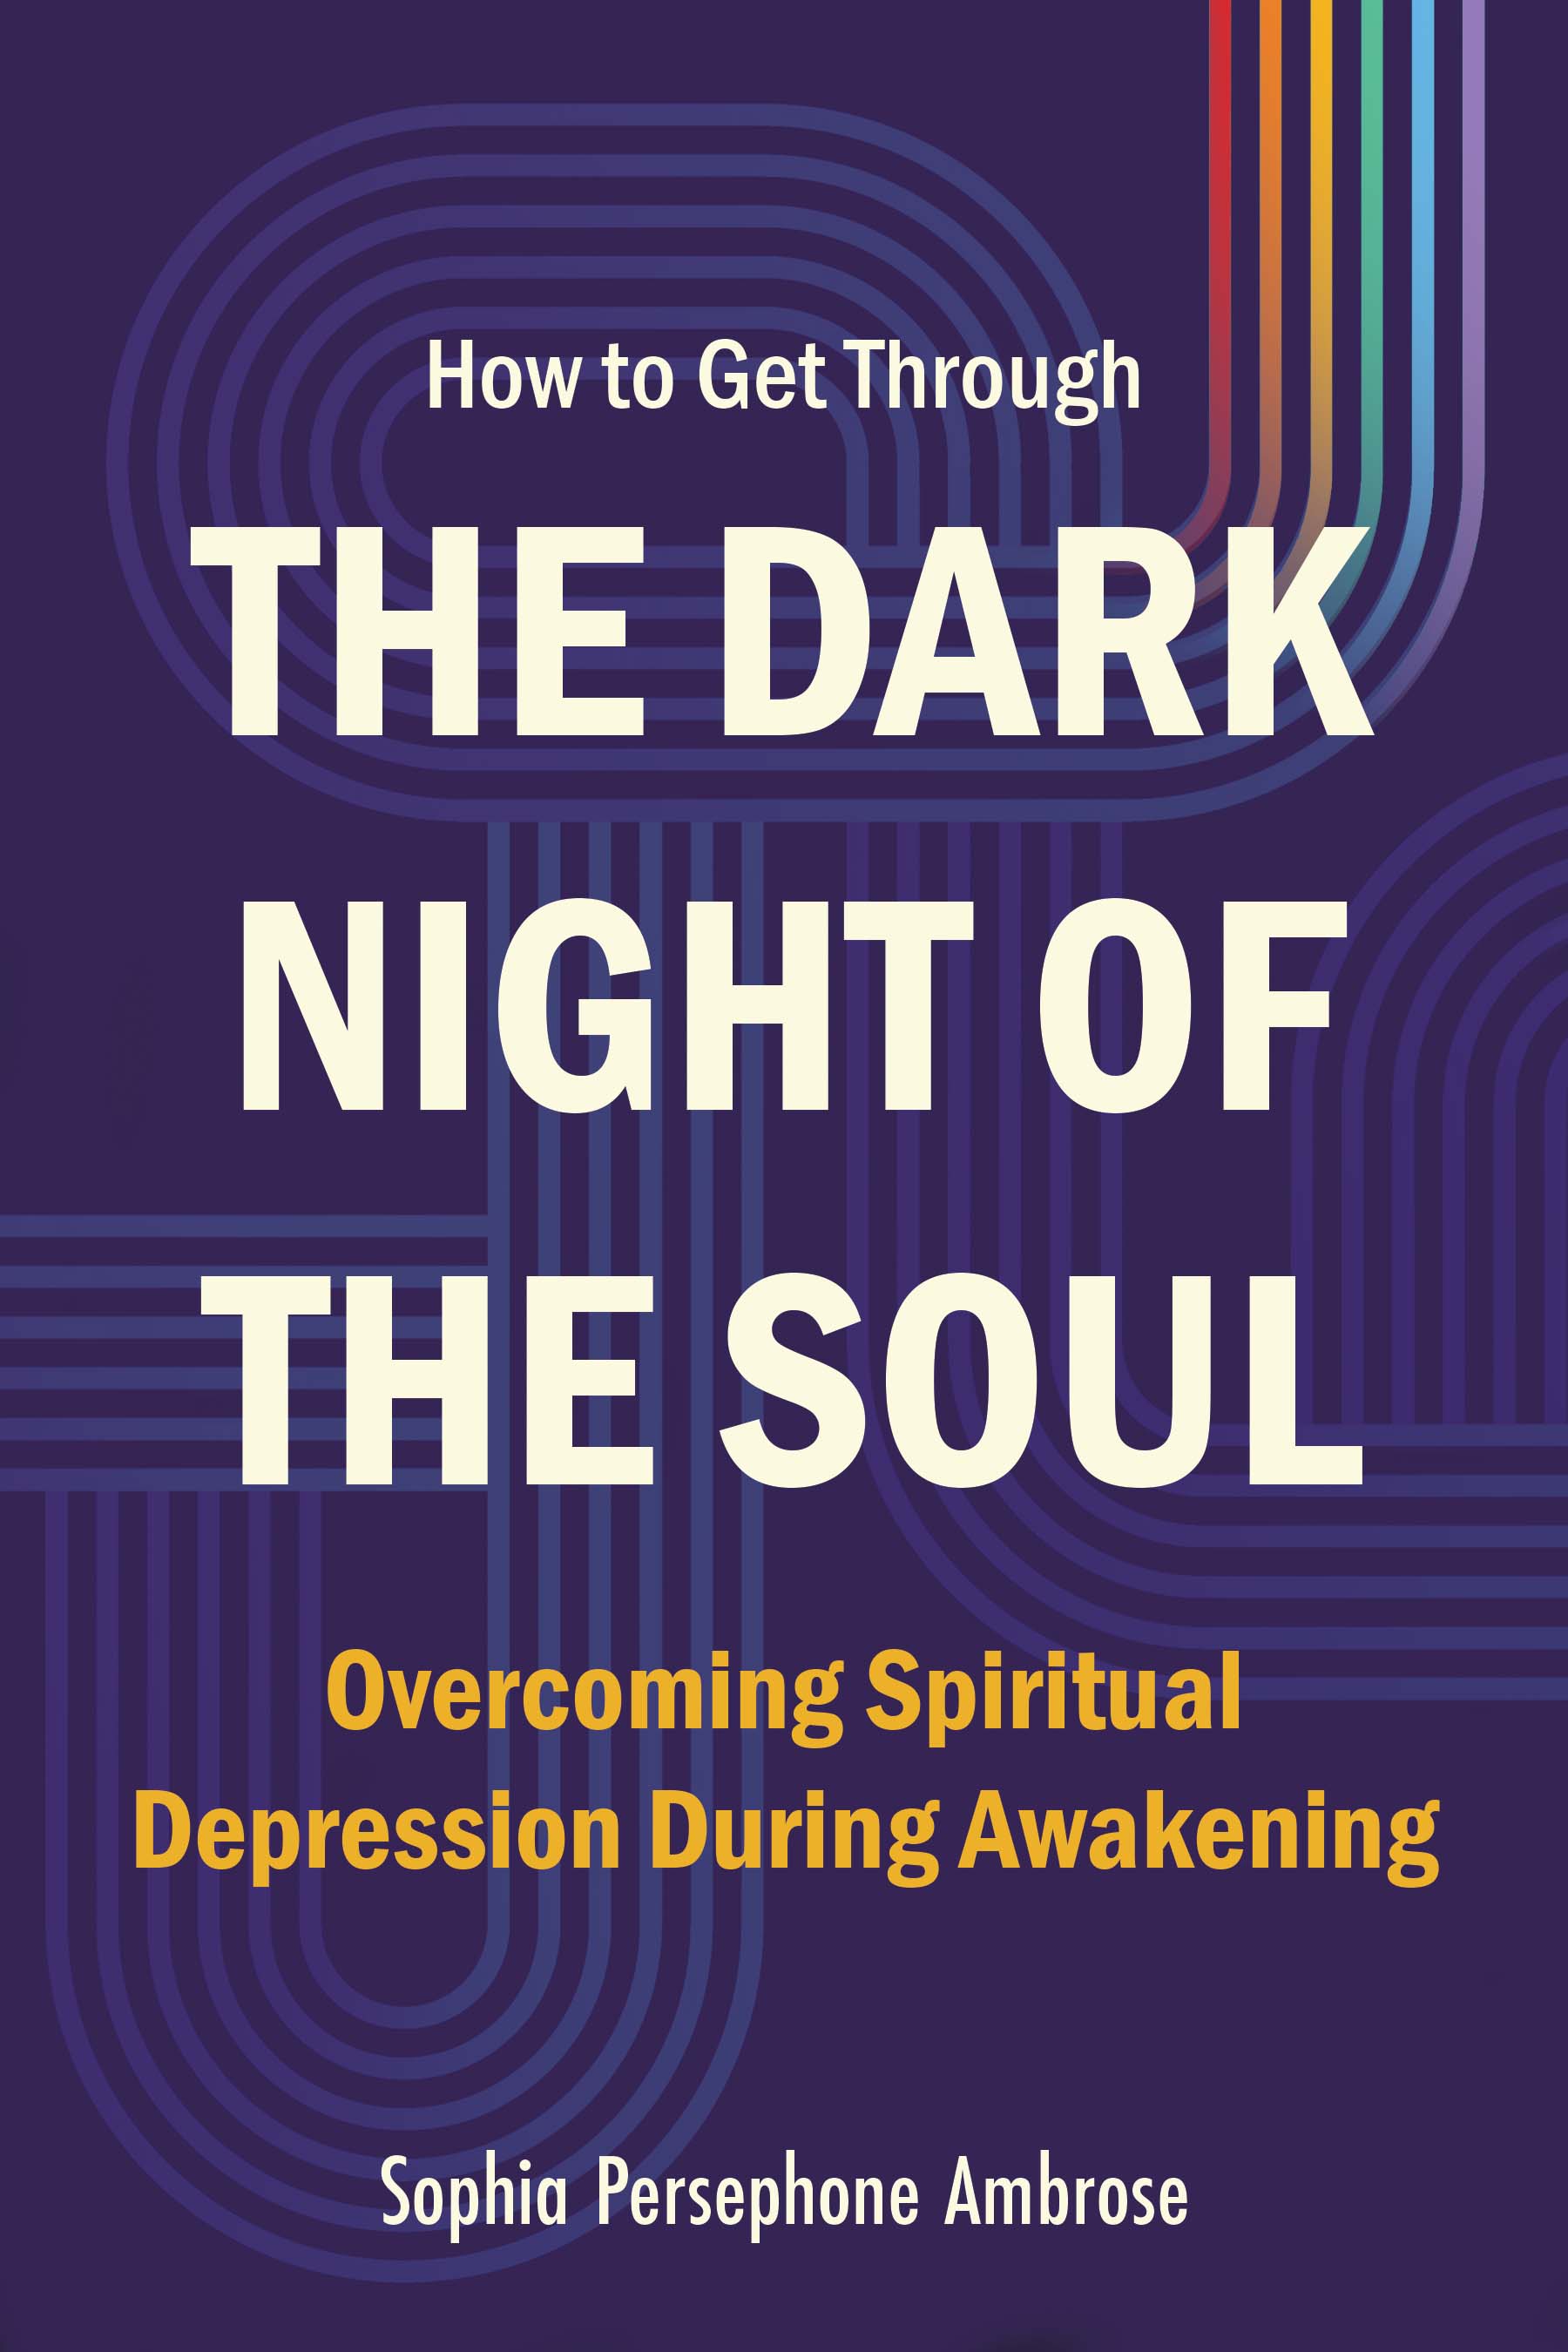 How to get through the Dark Night of the Soul book cover with the title in bold type on a purple background.